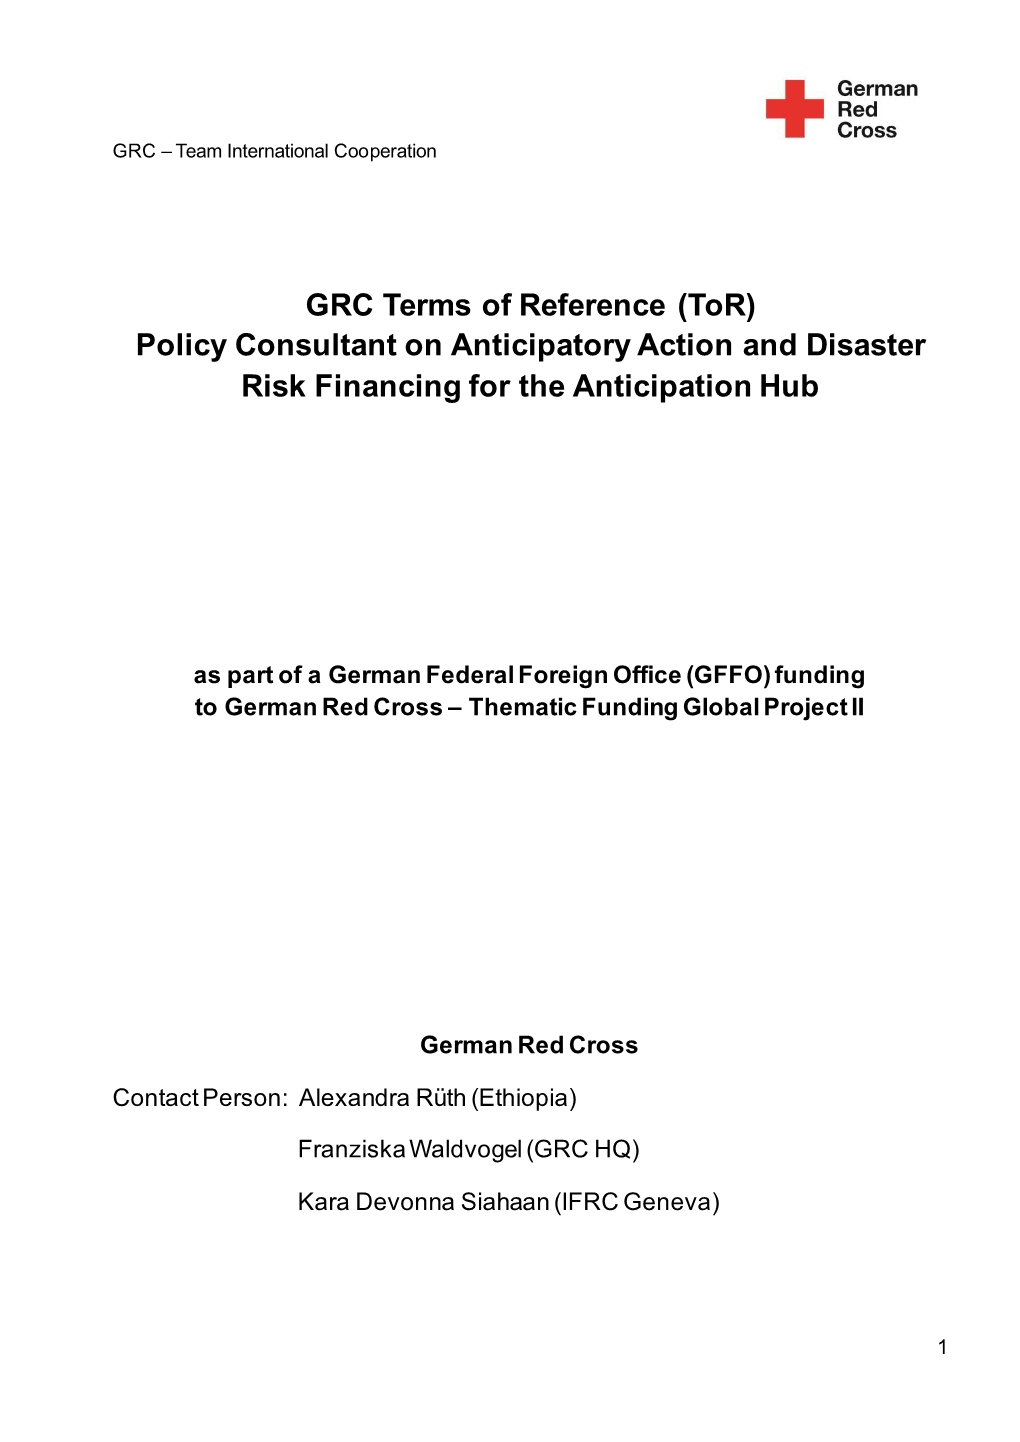 GRC Terms of Reference (Tor) Policy Consultant on Anticipatory Action and Disaster Risk Financing for the Anticipation Hub